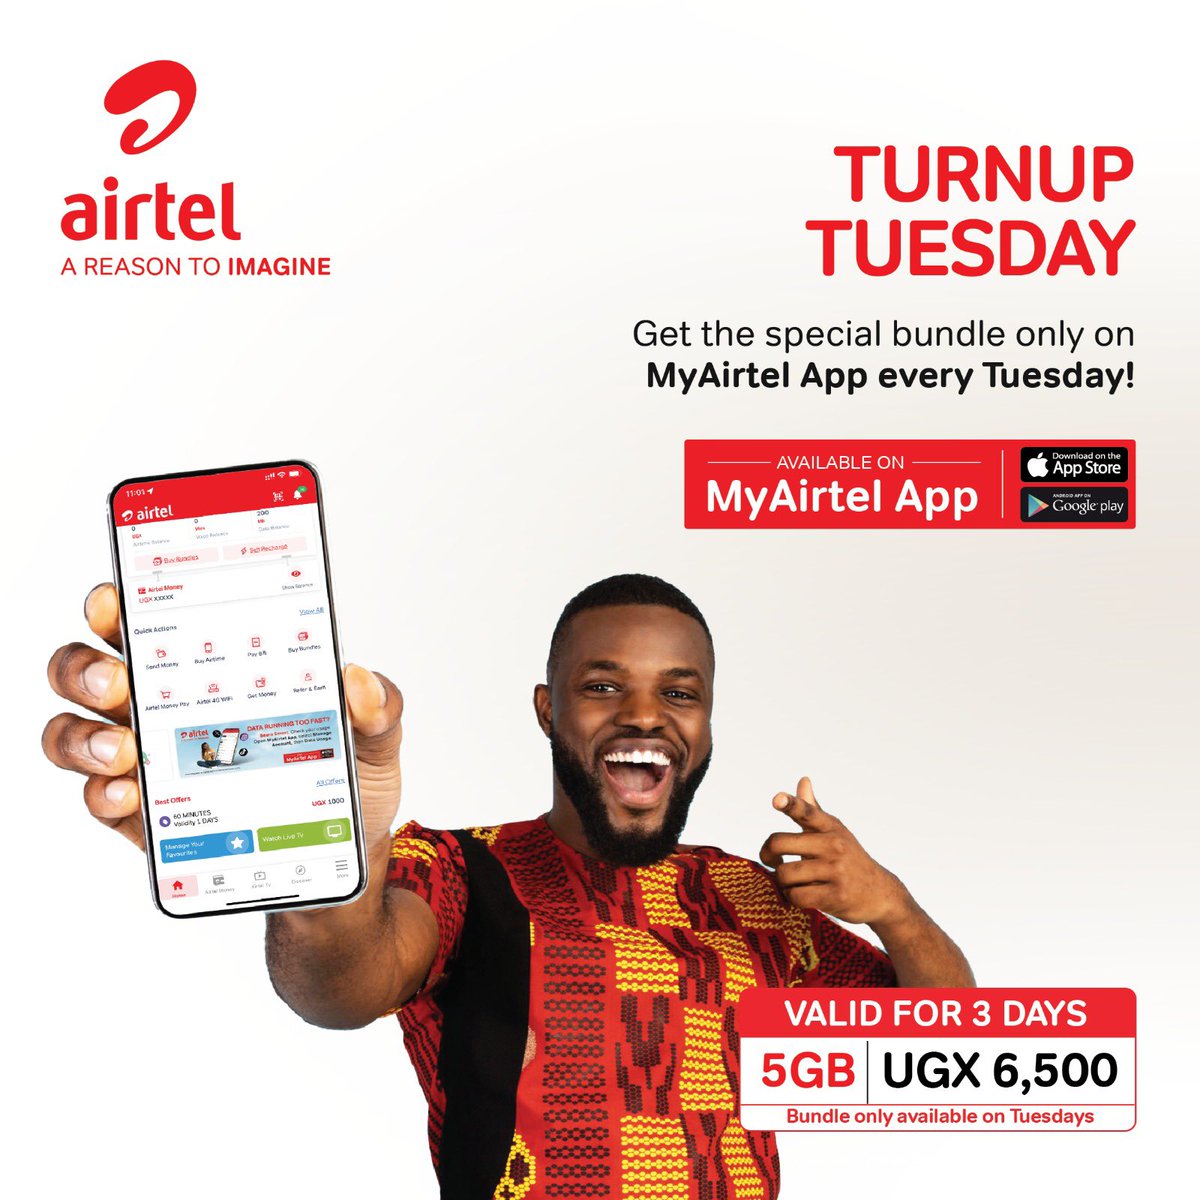 Start your Tuesday with our special bundle #TurnUpTuesday on #MyAirtelApp 

Click the link below to get a bundle and let the fun begin: airtelafrica.onelink.me/cGyr/qgj4qeu2